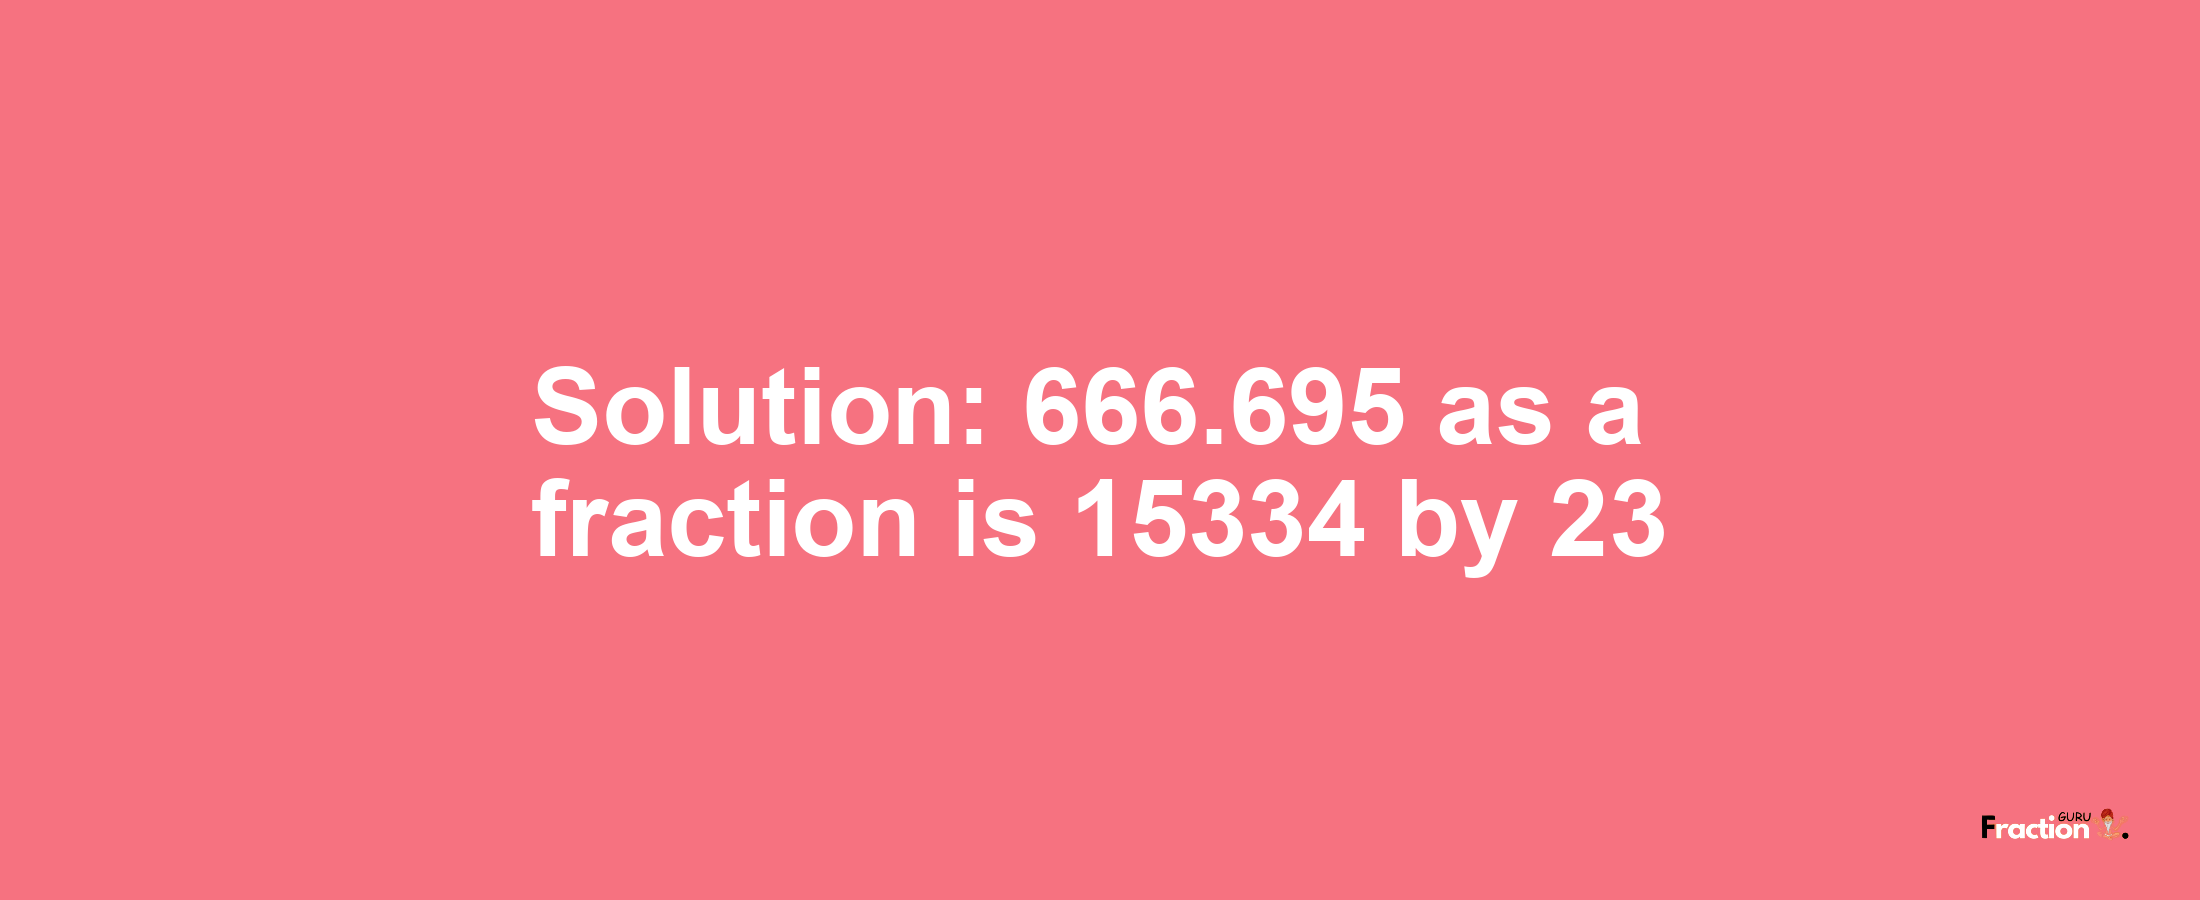 Solution:666.695 as a fraction is 15334/23